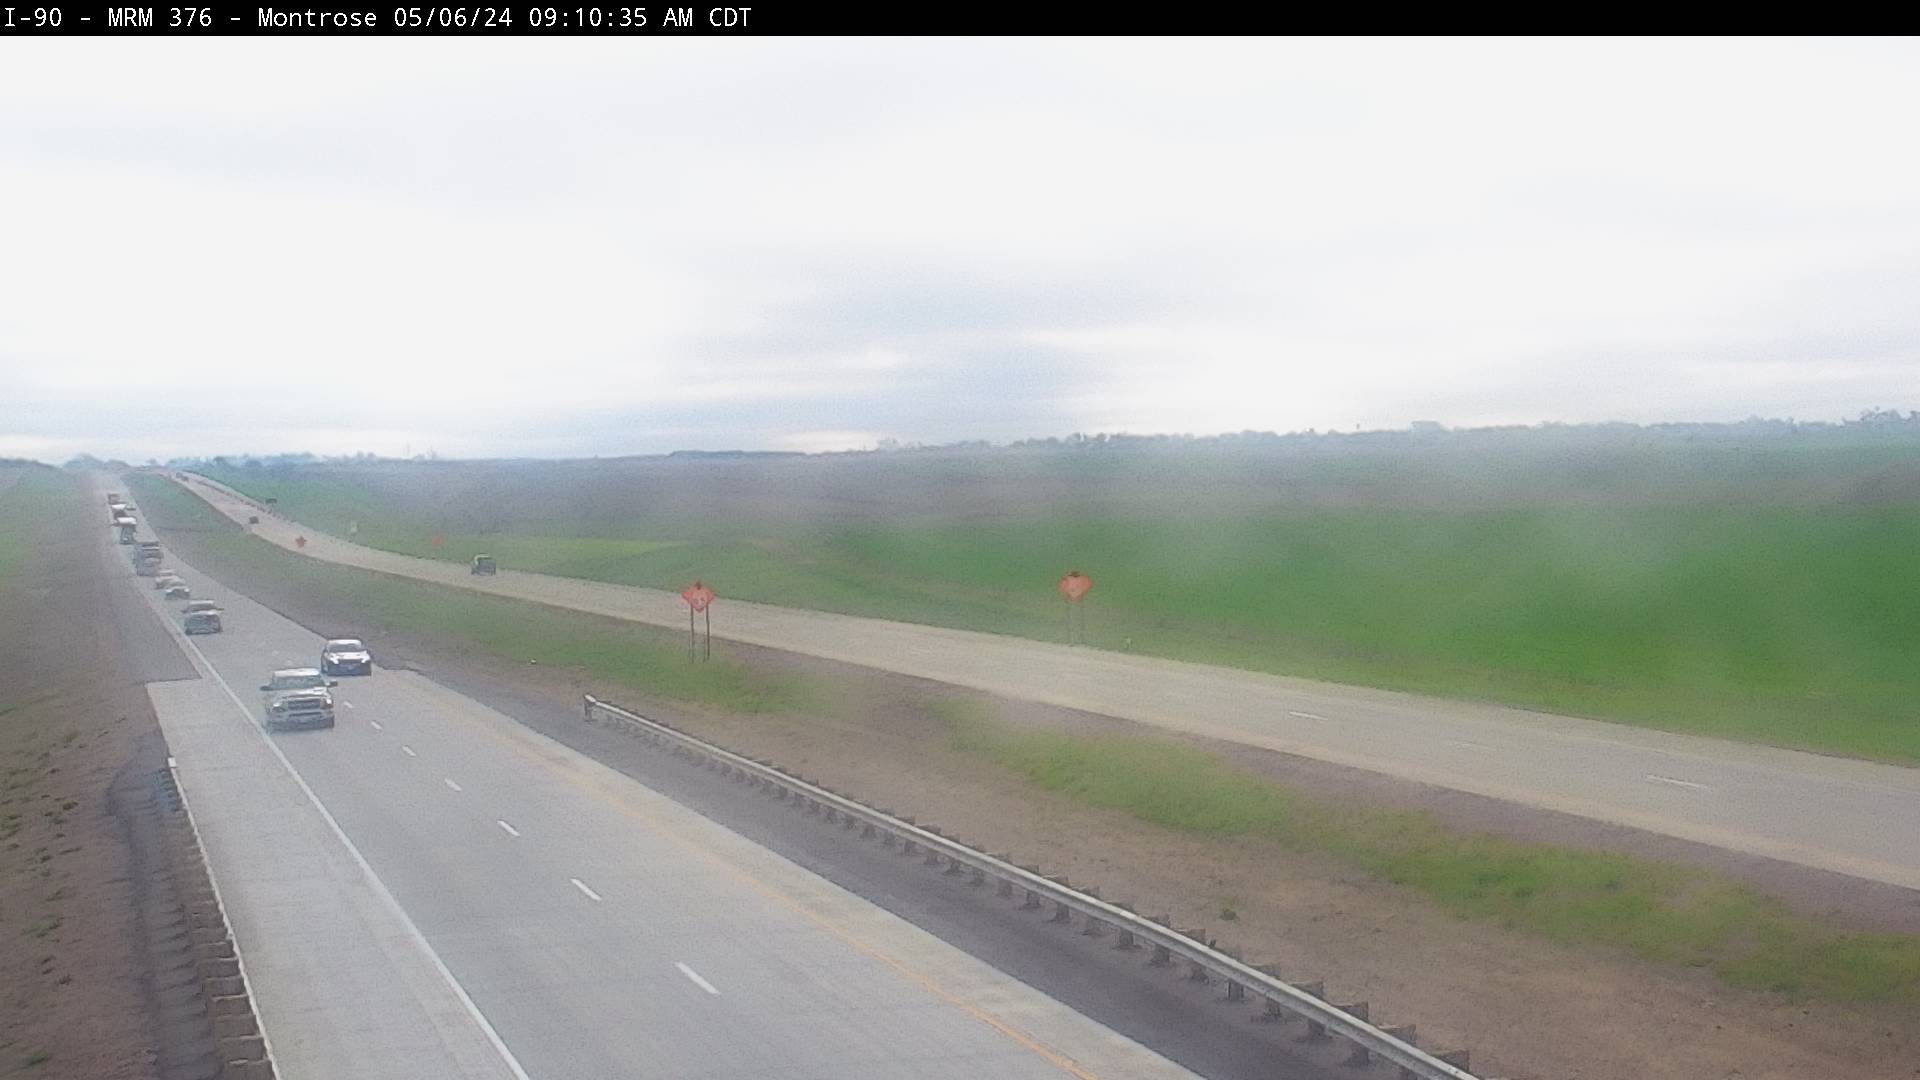 Traffic Cam 3 miles west of Humboldt along I-90 @ MP 376.0 - East Player